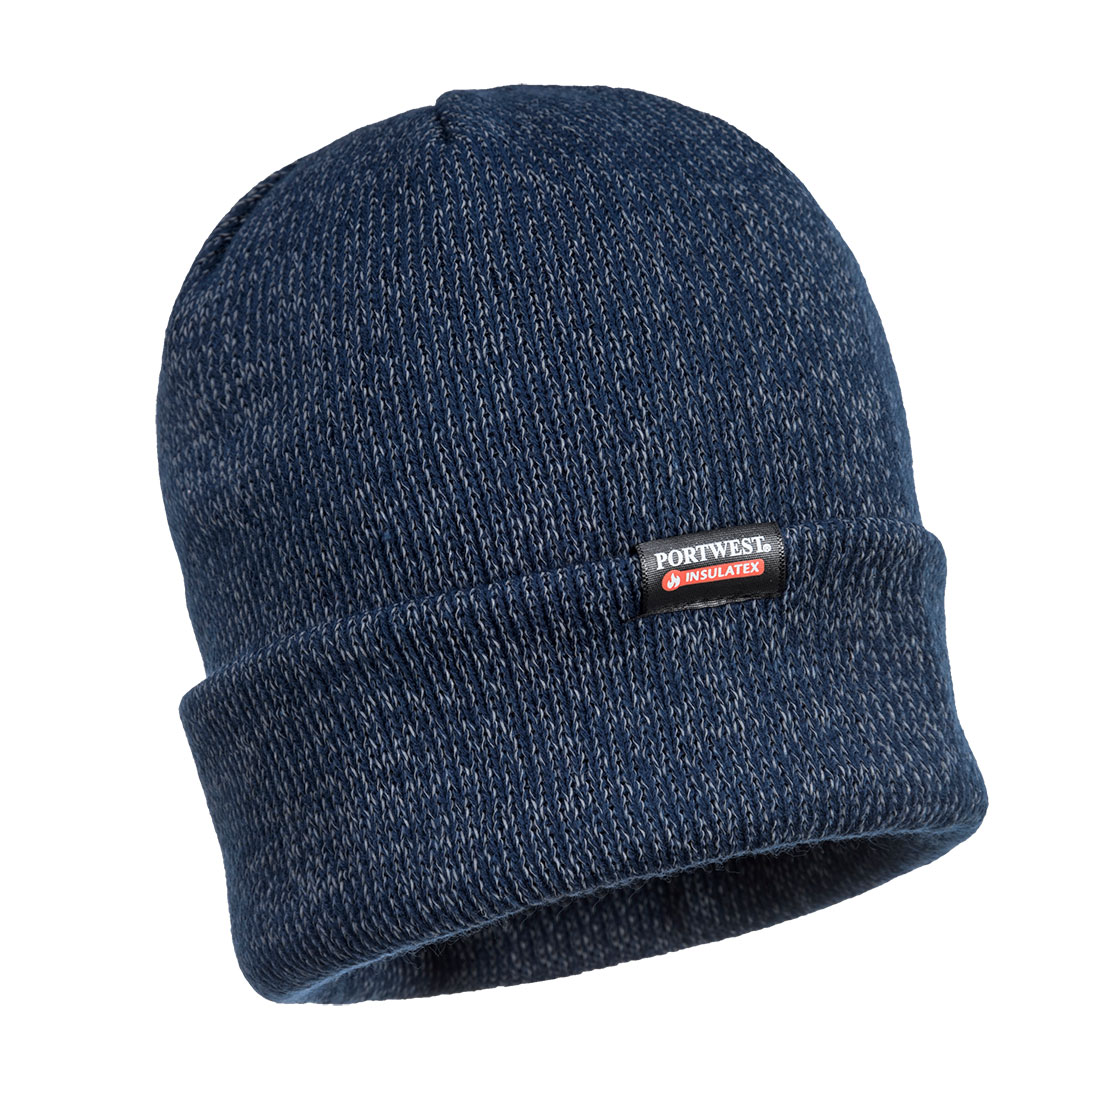 Reflective Knit Hat, Insulatex Lined